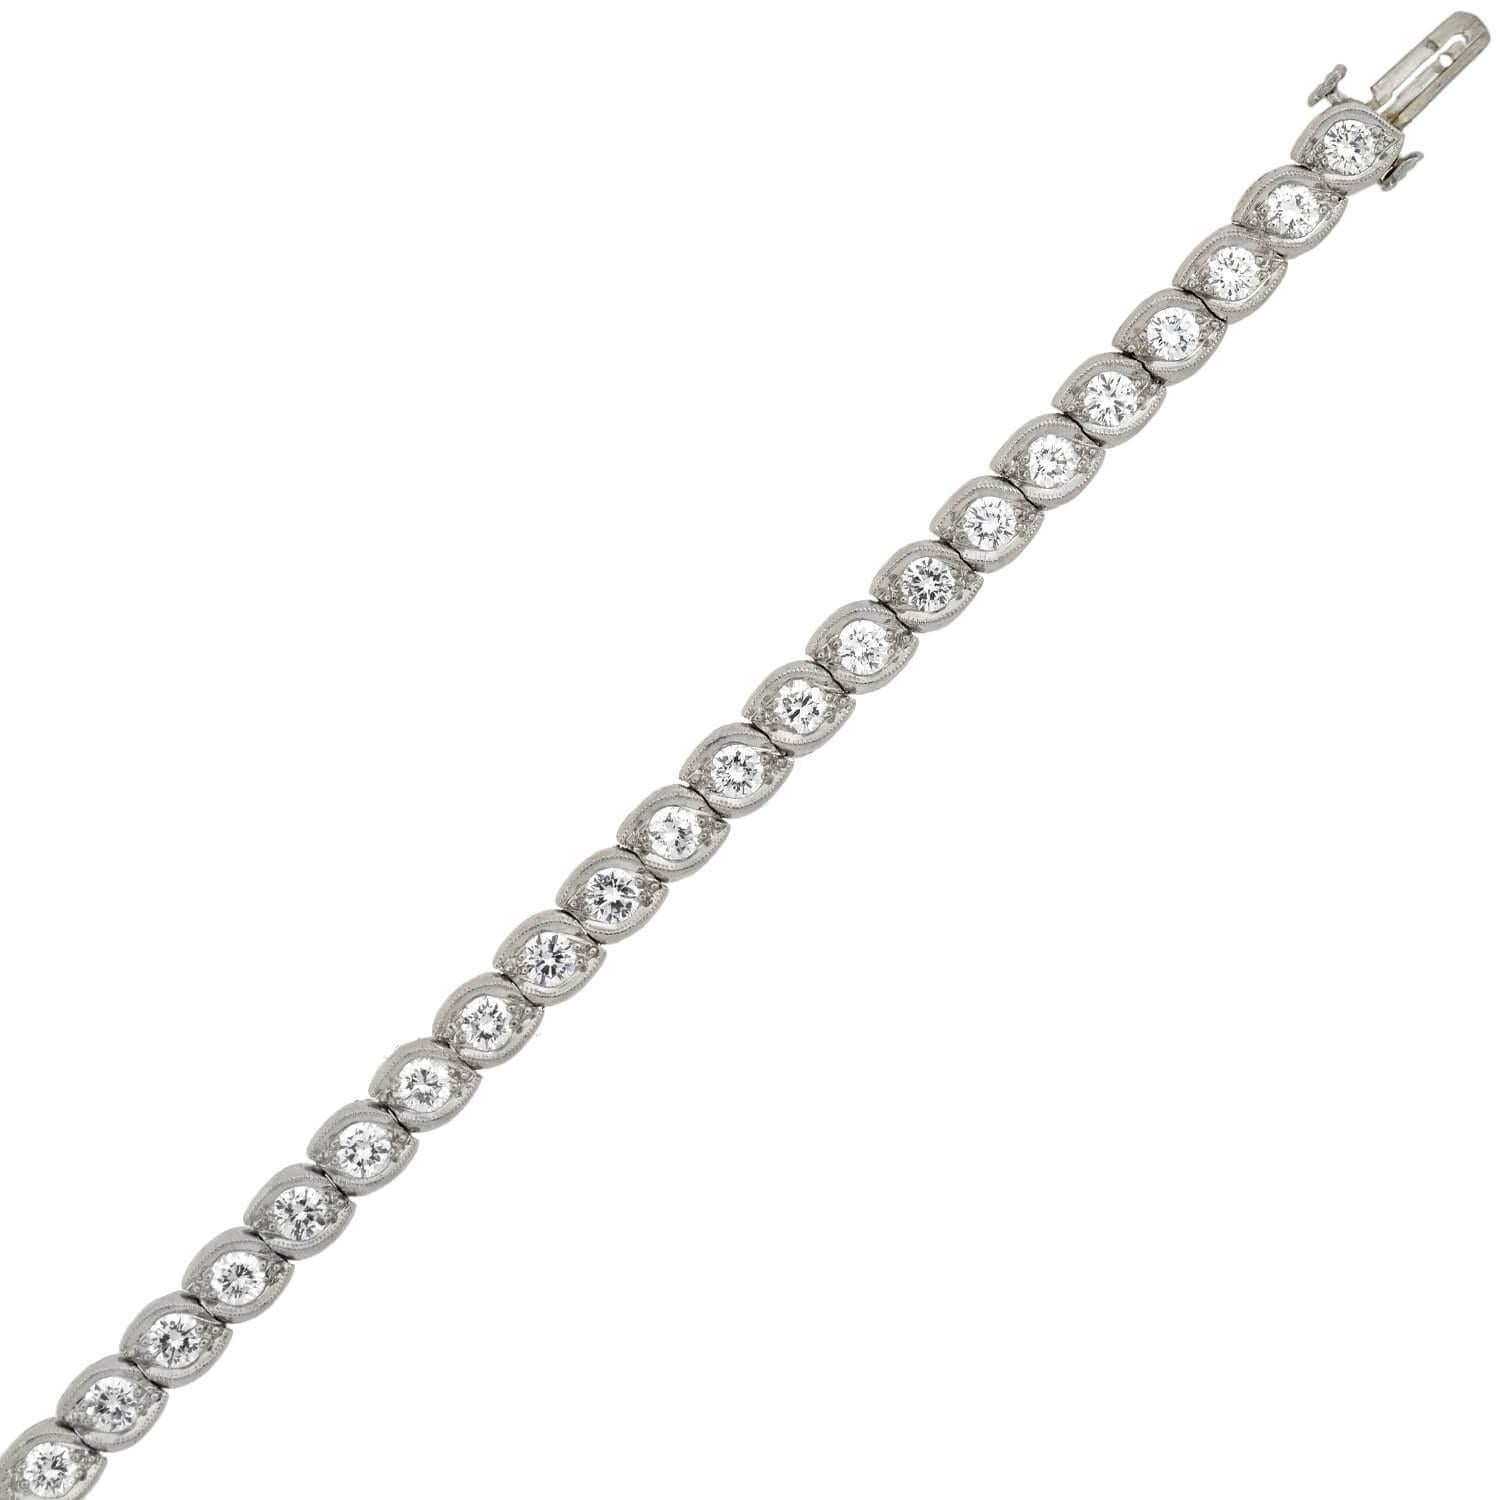 A stunning diamond line bracelet from the notable American jewelry maker J.E. Caldwell & Co.! From the late Art Deco (ca1930s) era, this wonderful piece is crafted in platinum, and comprised of 45 Transitional Cut diamond accented links, creating a